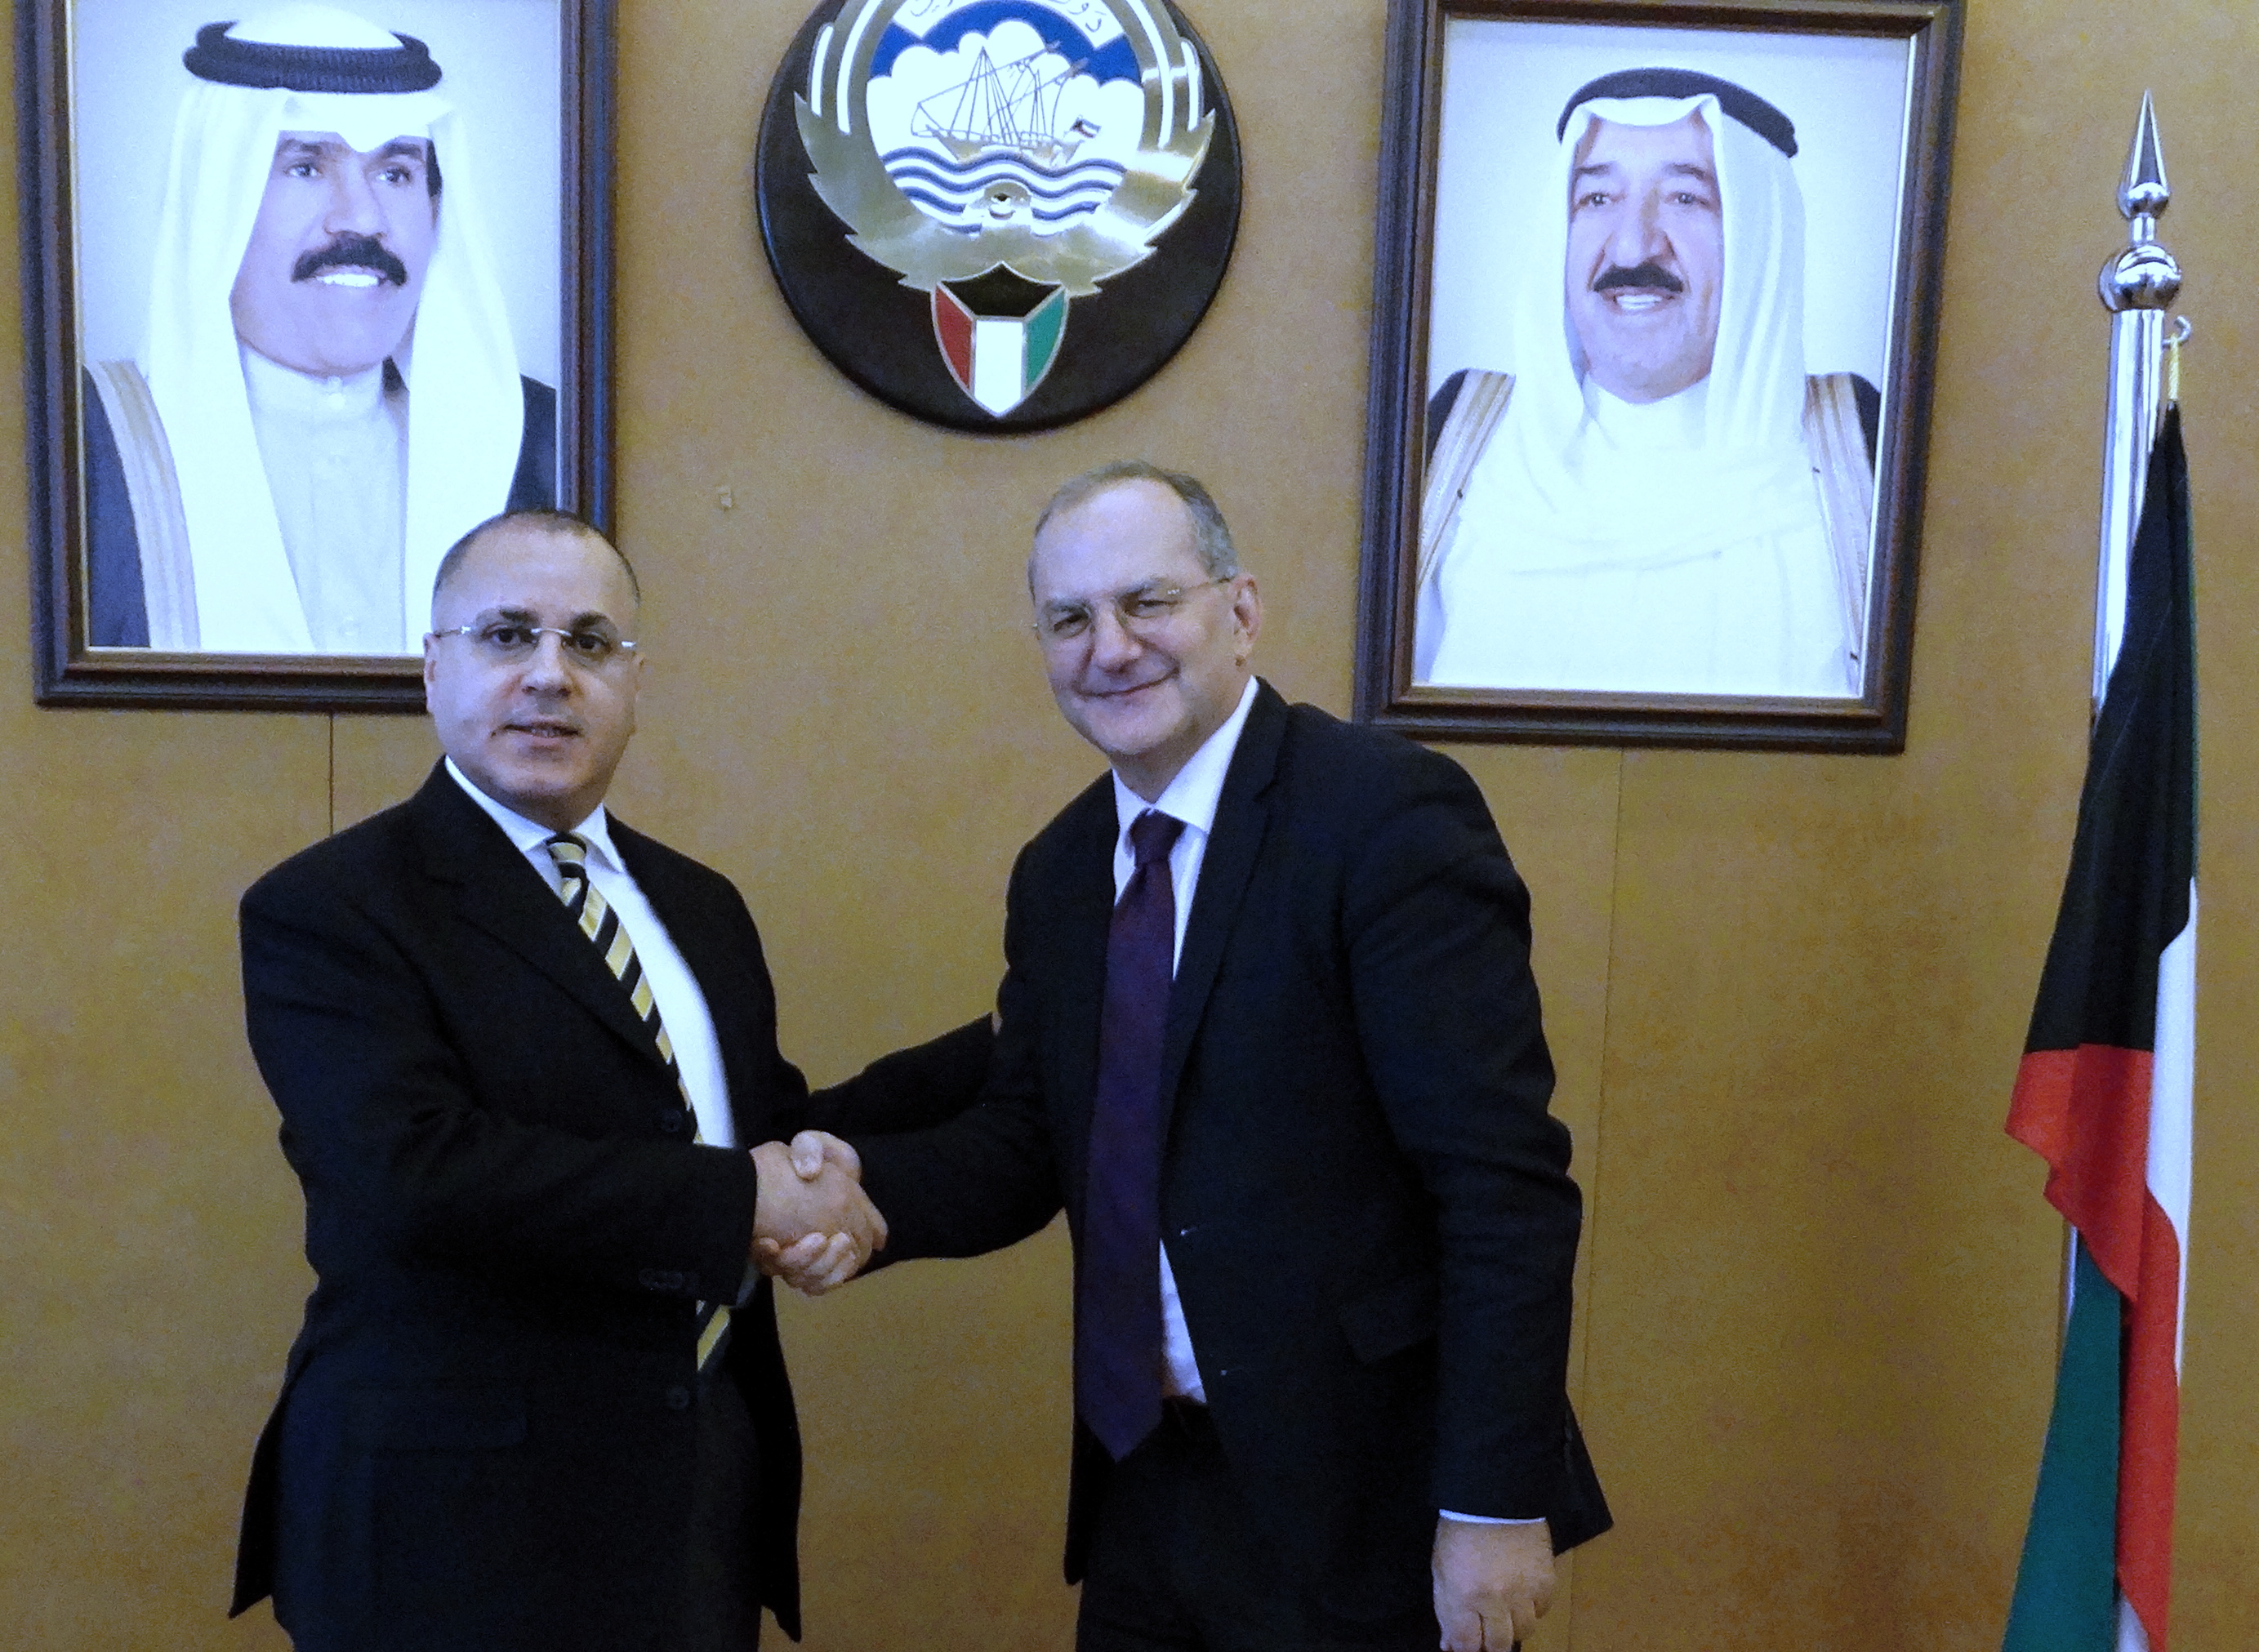 Kuwait's permanent delegate to the United Nations Ambassador Jamal Al-Ghunaim meets with the Executive Director of WHO's emergencies program Peter Salama